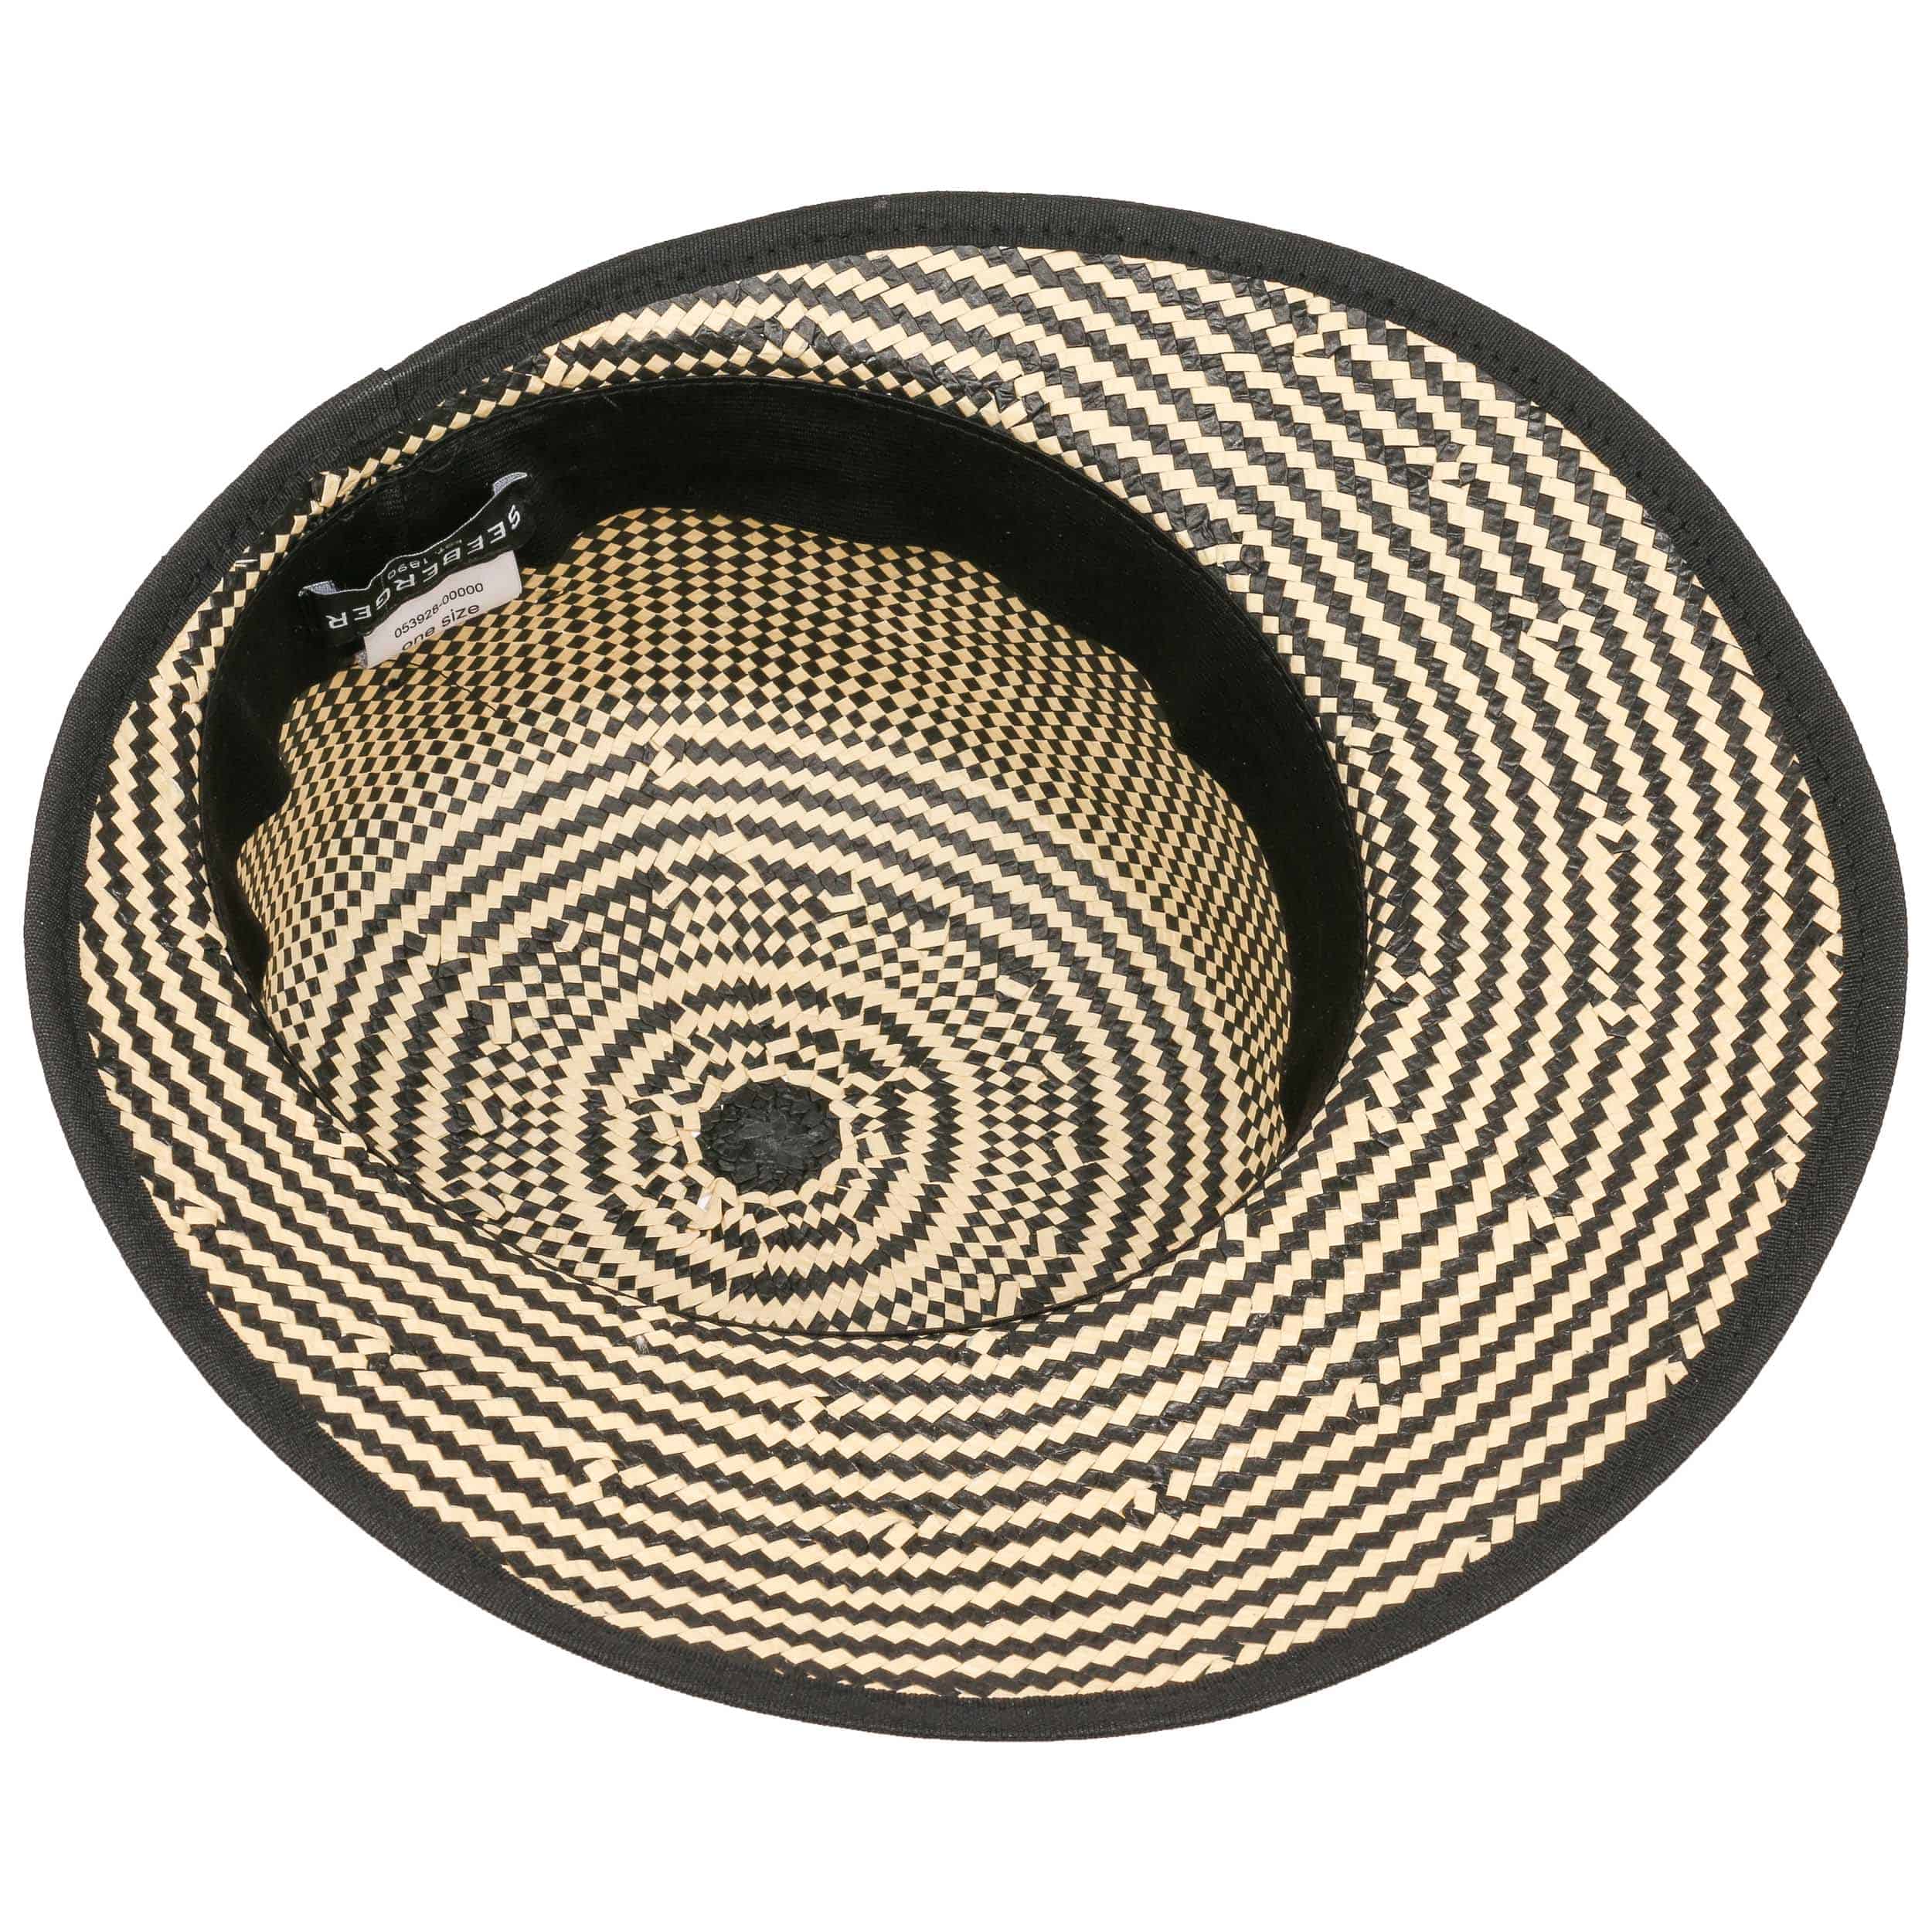 Twotone Straw Cap by Seeberger - 42,95